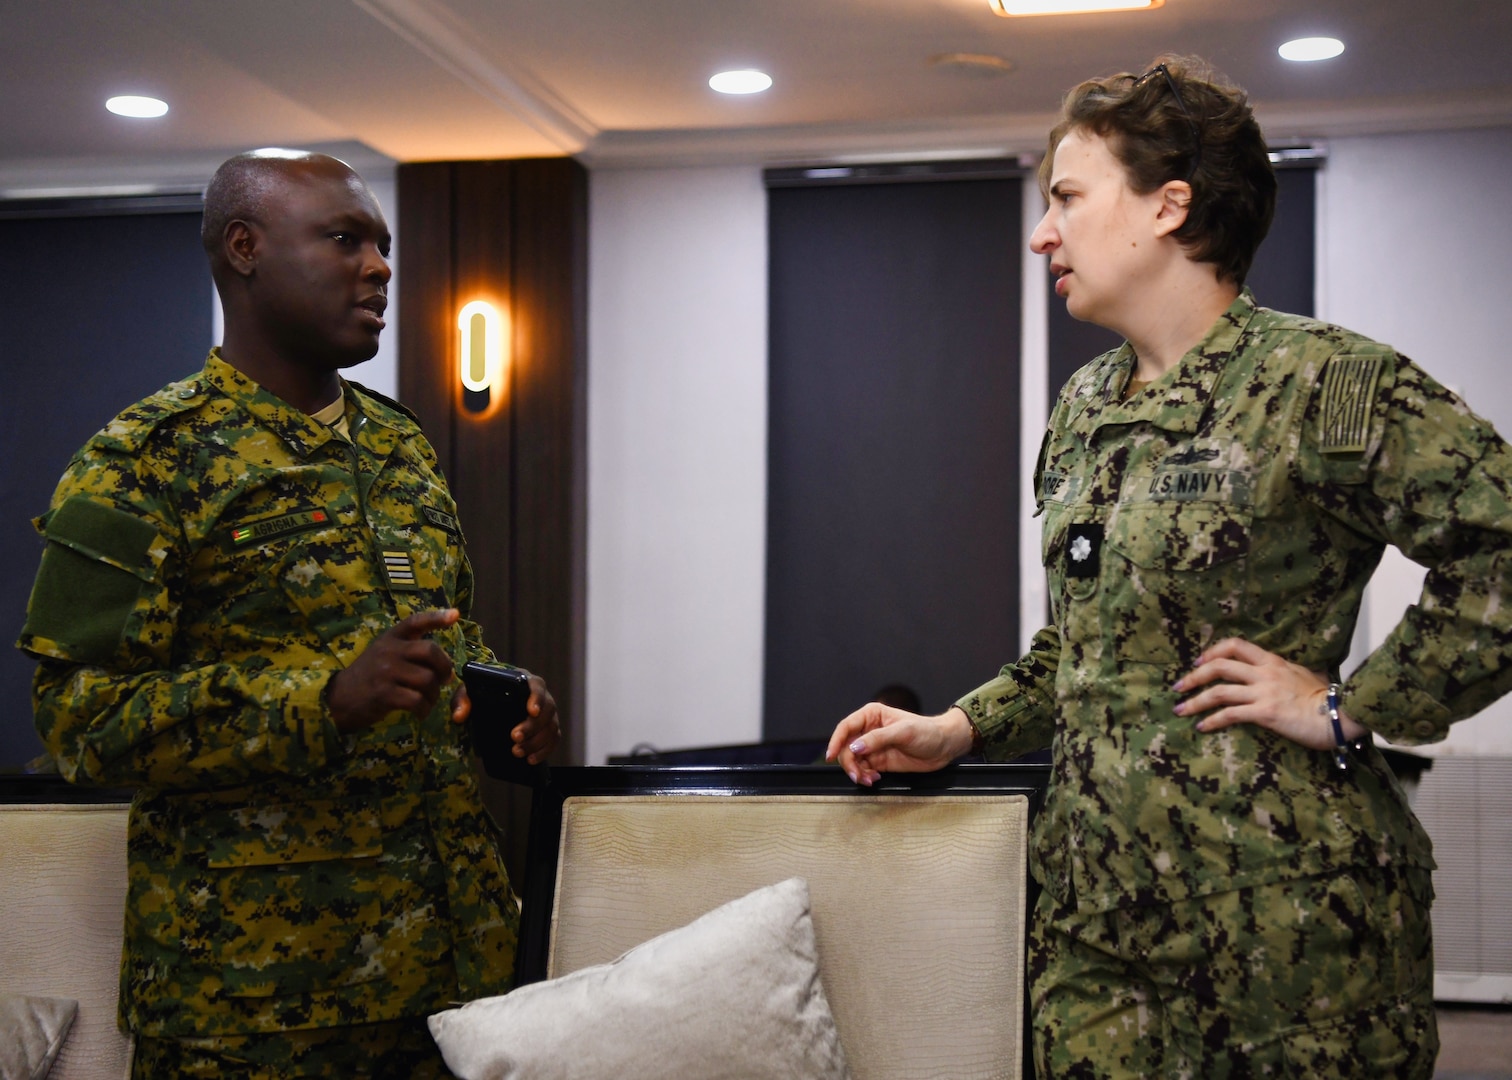 Togo Navy Cmdr. Sama Agrigna, a liaison officer, speaks with Cmdr. Victoria Moore, a naval attache to the U.S. Consulate in Nigeria, in the Naval Dockyard in Lagos, Nigeria, Jan. 23, 2023. Obangame Express 2023, conducted by U.S. Naval Forces Africa, is a maritime exercise designed to improve cooperation, and increase maritime safety and security among participating nations in the Gulf of Guinea and Southern Atlantic Ocean. U.S. Sixth Fleet, headquartered in Naples, Italy, conducts the full spectrum of joint and naval operations, often in concert with allied and interagency partners, in order to advance U.S. national interests and security and stability in Europe and Africa. (U.S. Navy photo by Mass Communication Specialist 1st class Cameron C. Edy)